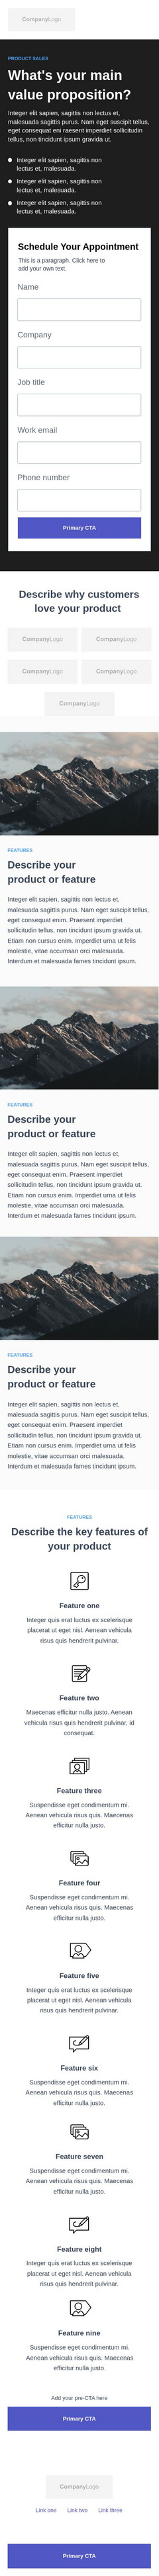 SaaS and Internet Instapage Layout 1